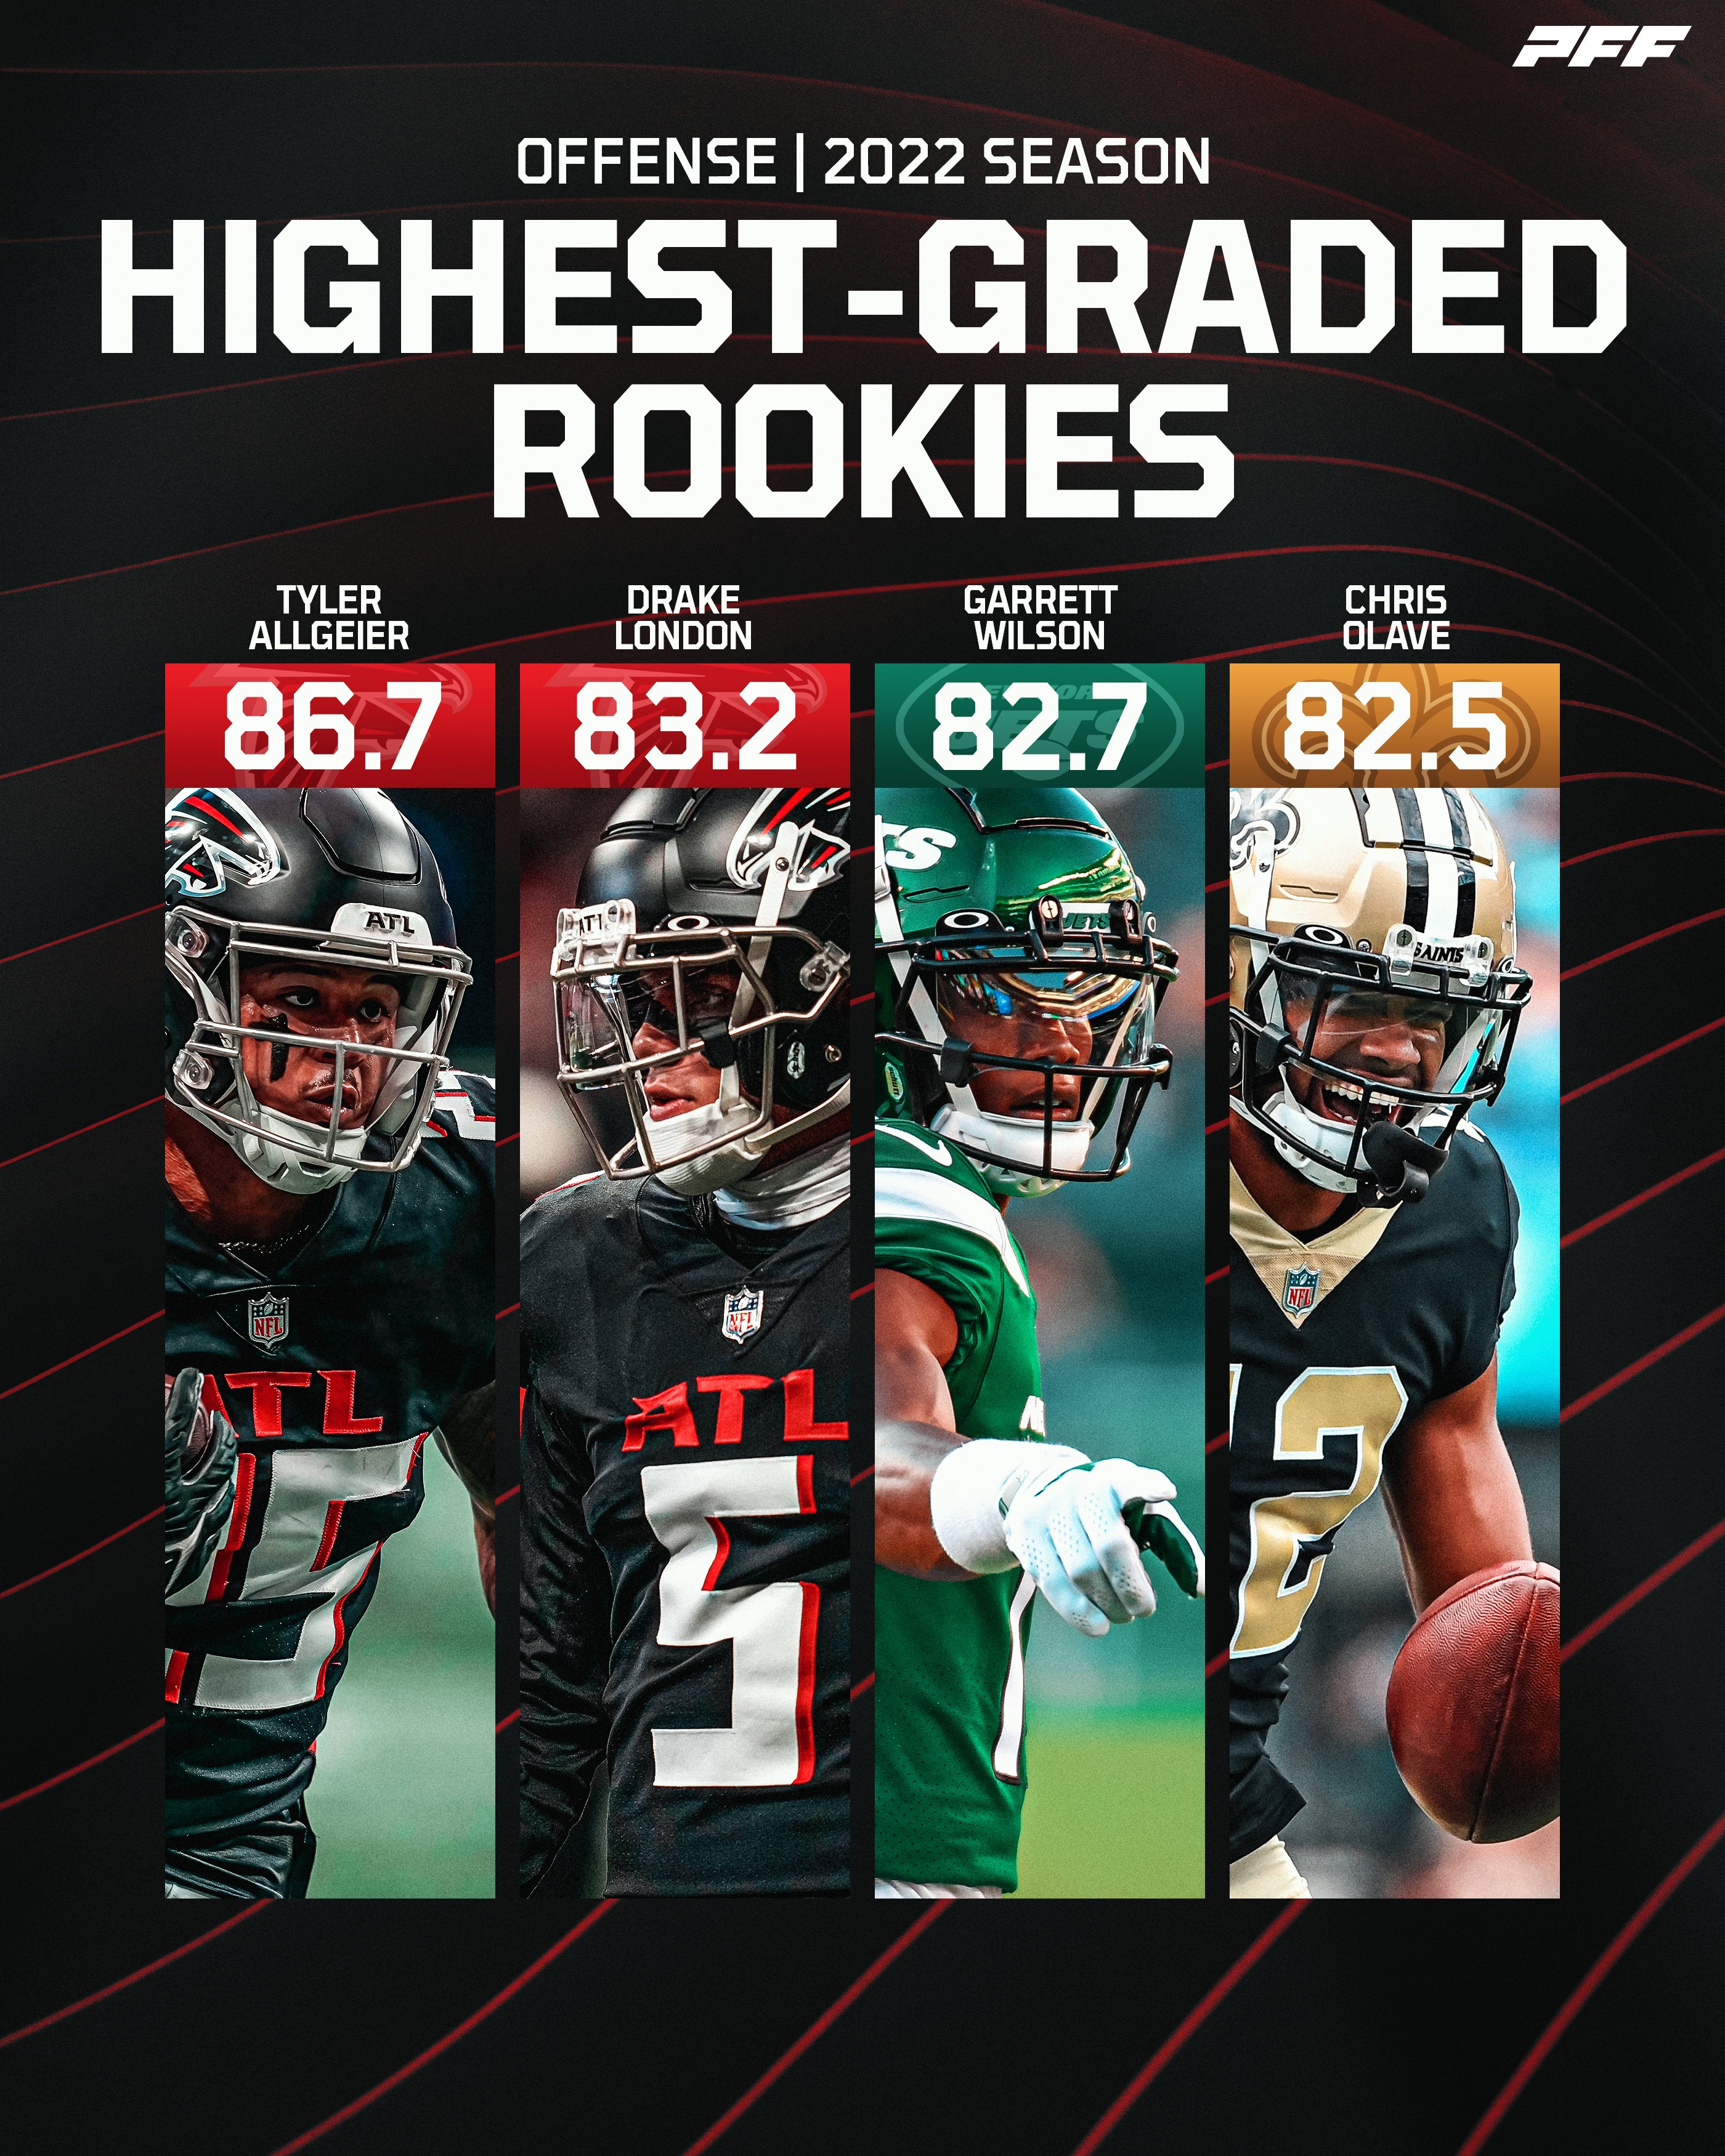 PFF on Twitter "The highestgraded offensive rookies from the 2022